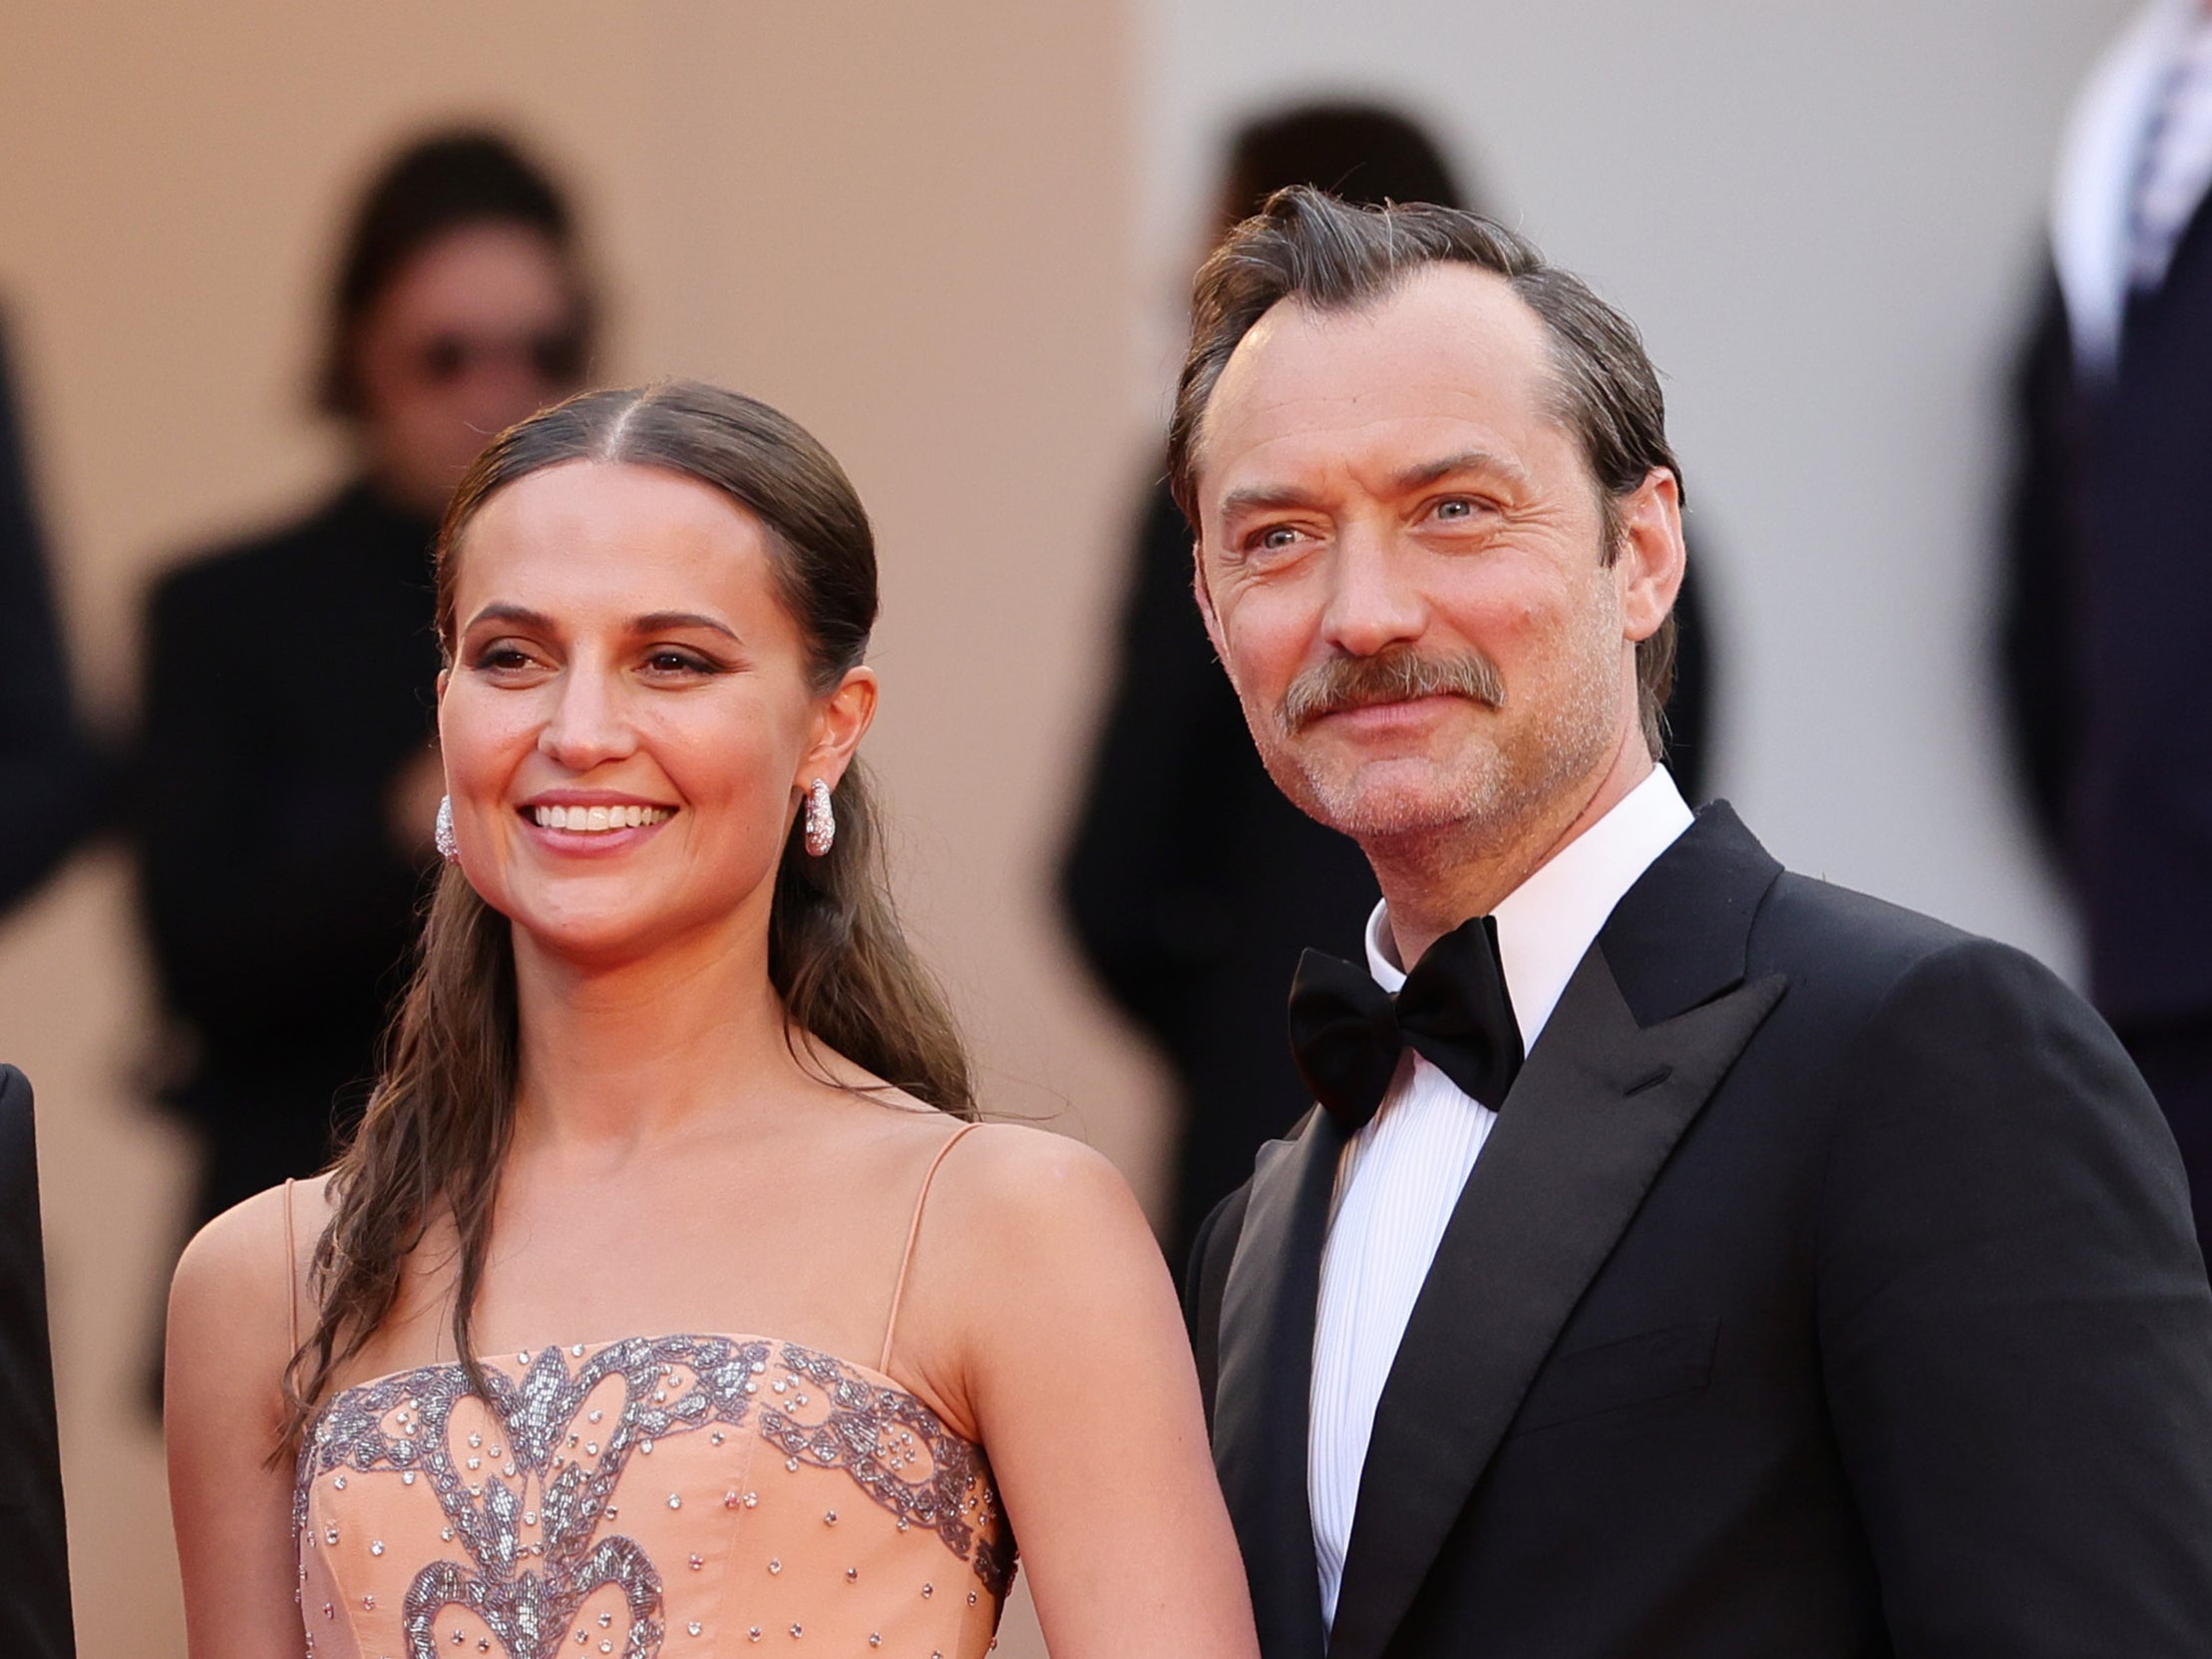 Firebrand: Alicia Vikander and Jude Law get eight-minute standing ovation  at Cannes